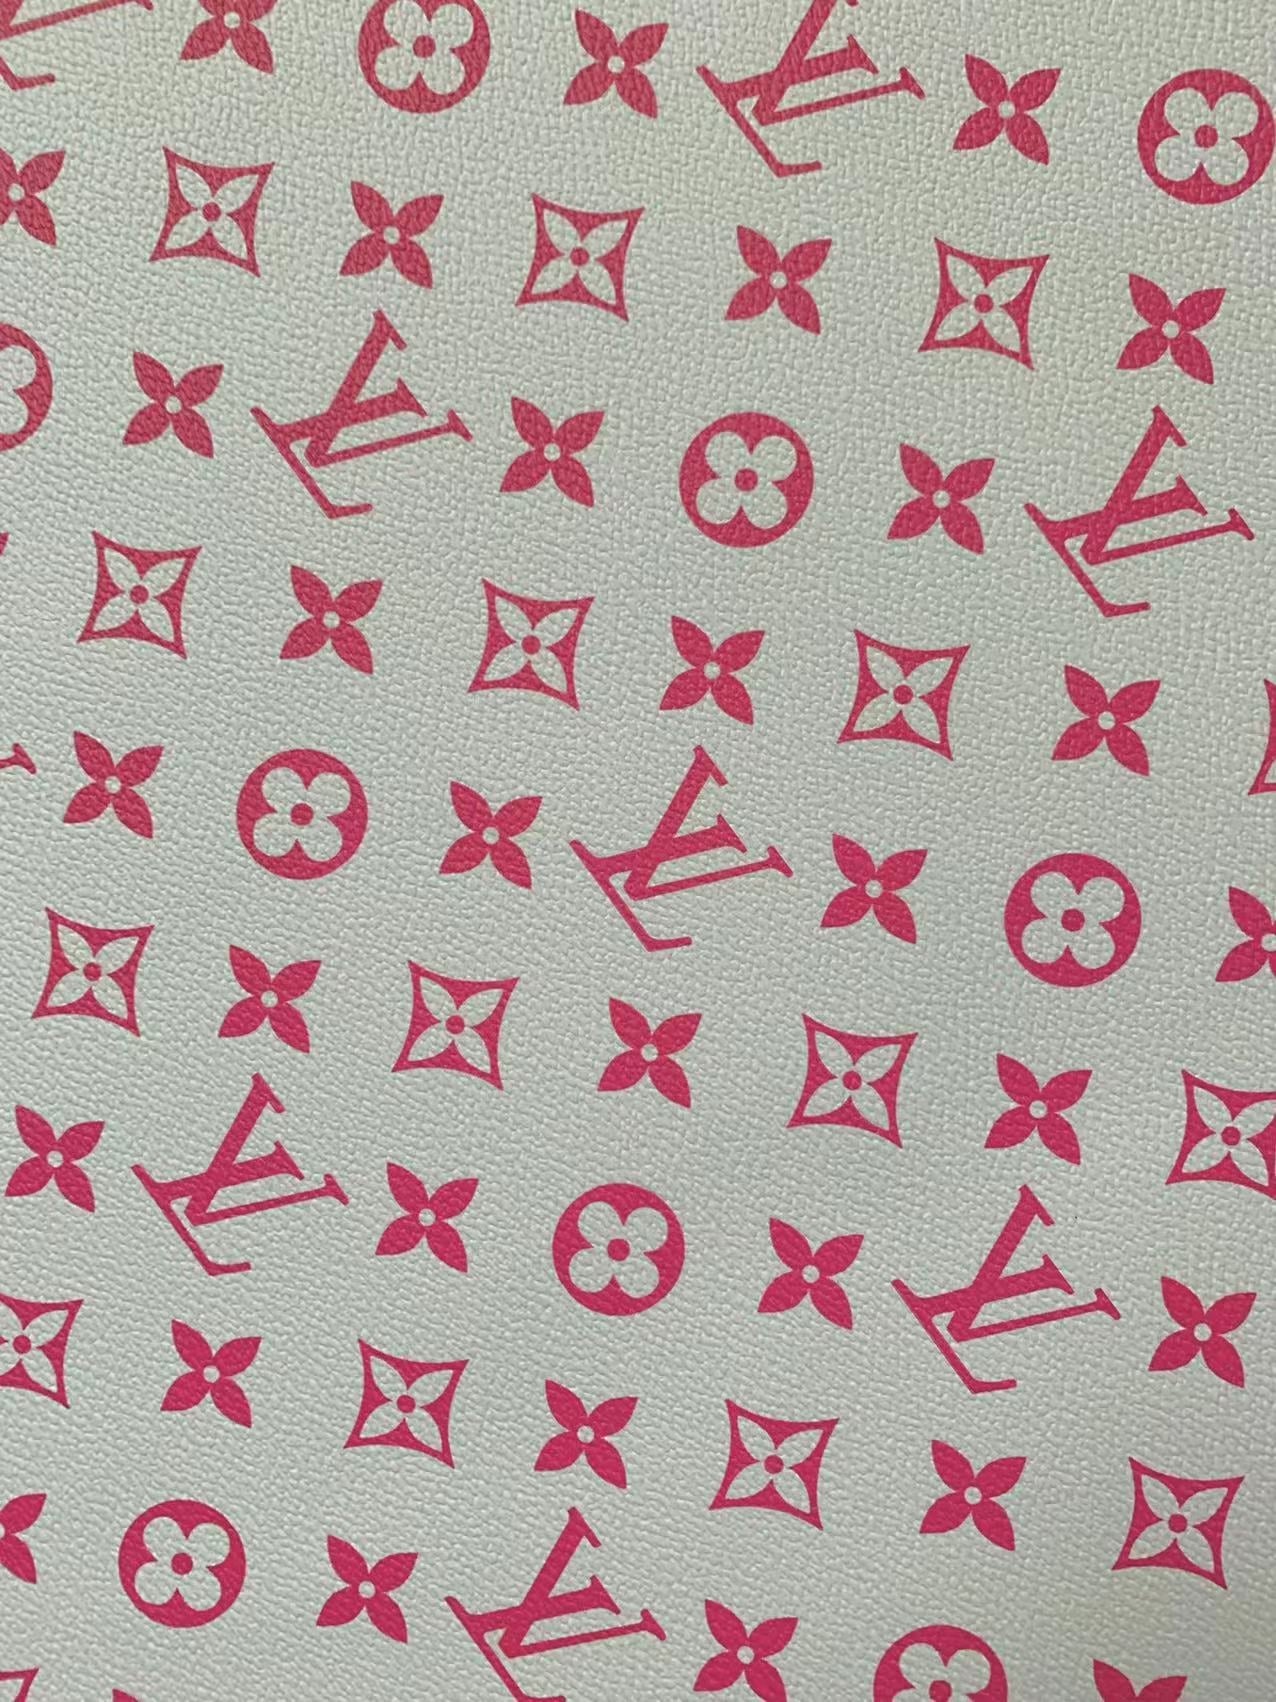 louis vuitton print material fabric by the yard